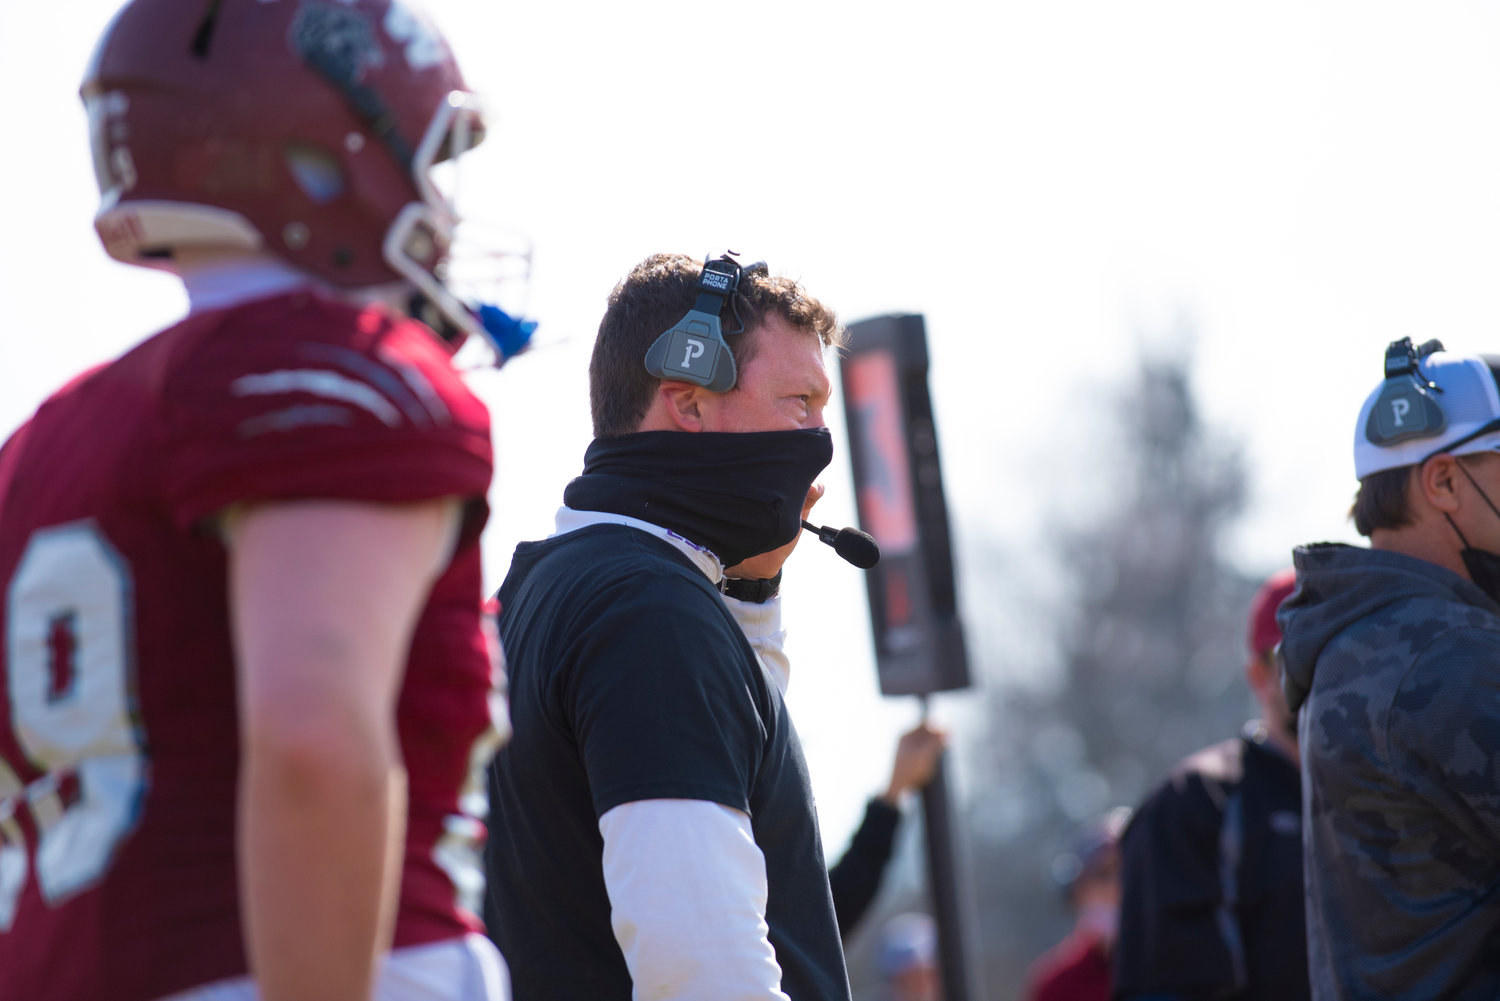 W.F. West coach Dan Hill watches his team take on Tumwater at home Saturday.